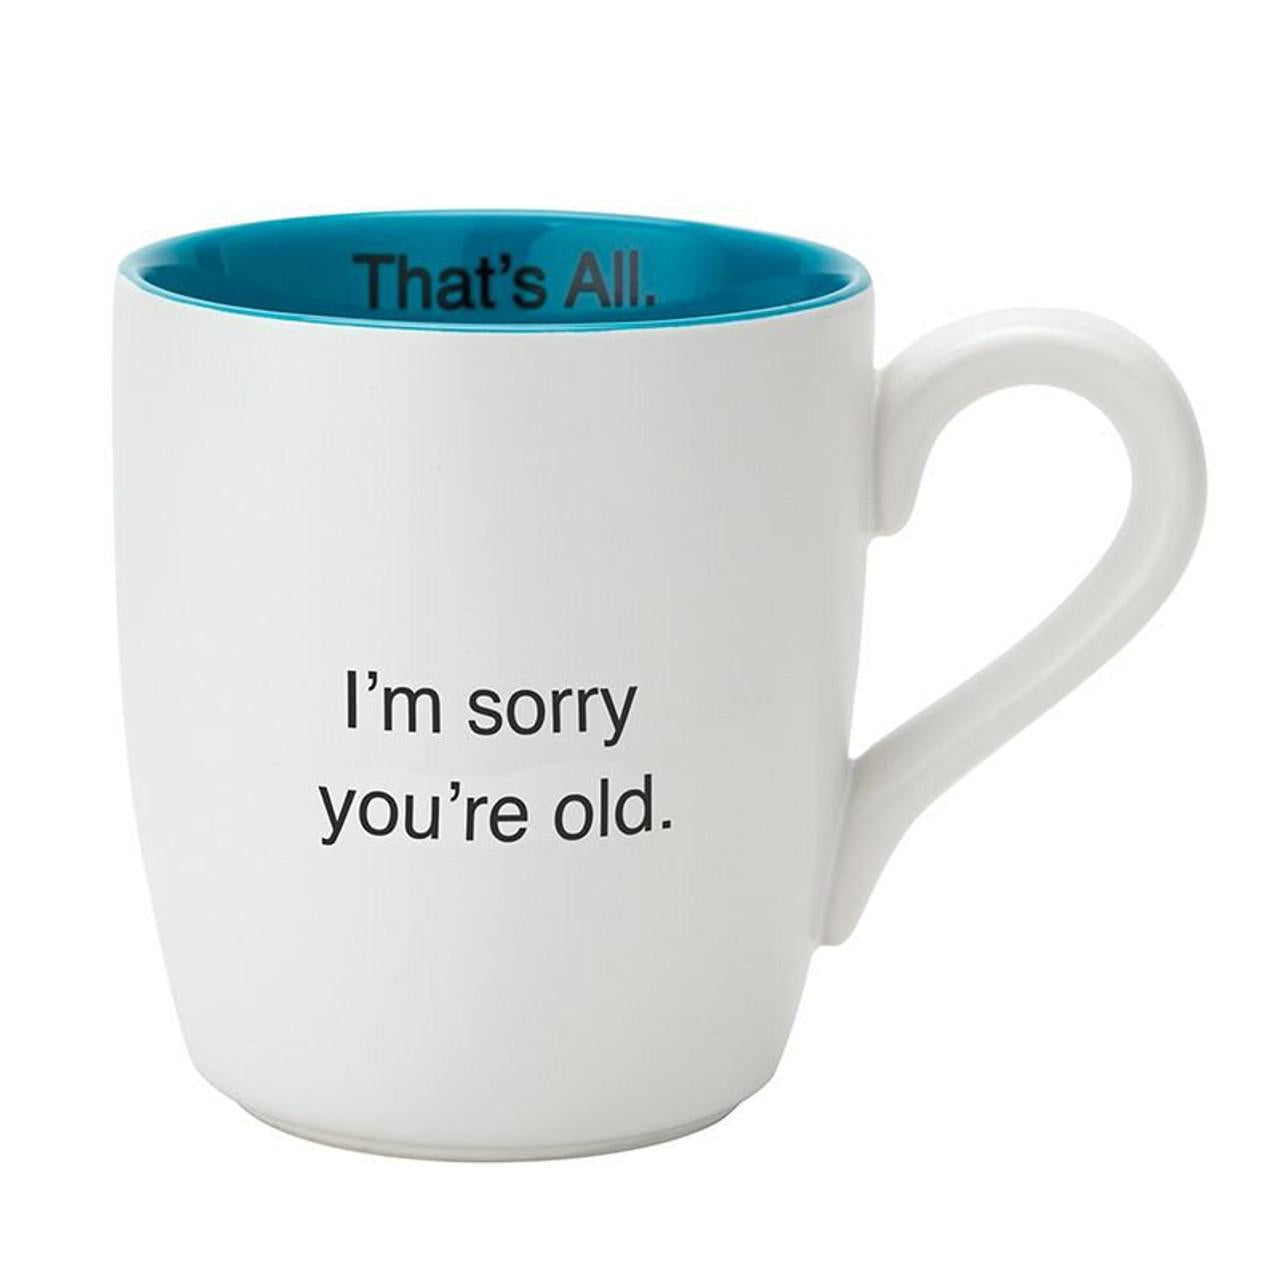 That's All Mug - Sorry You're Old